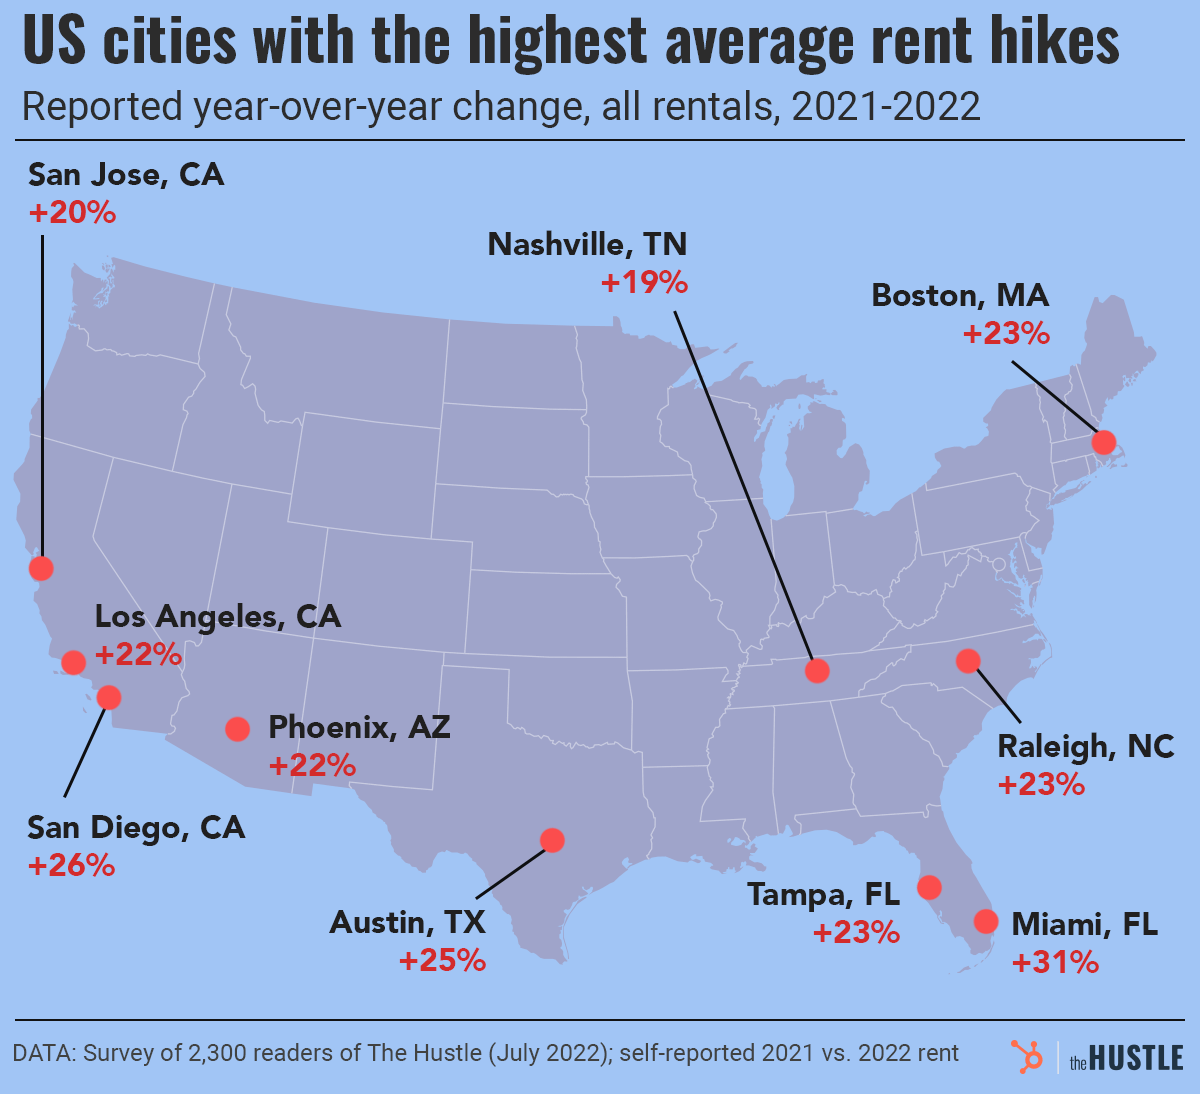 rent increase percentages across the United States